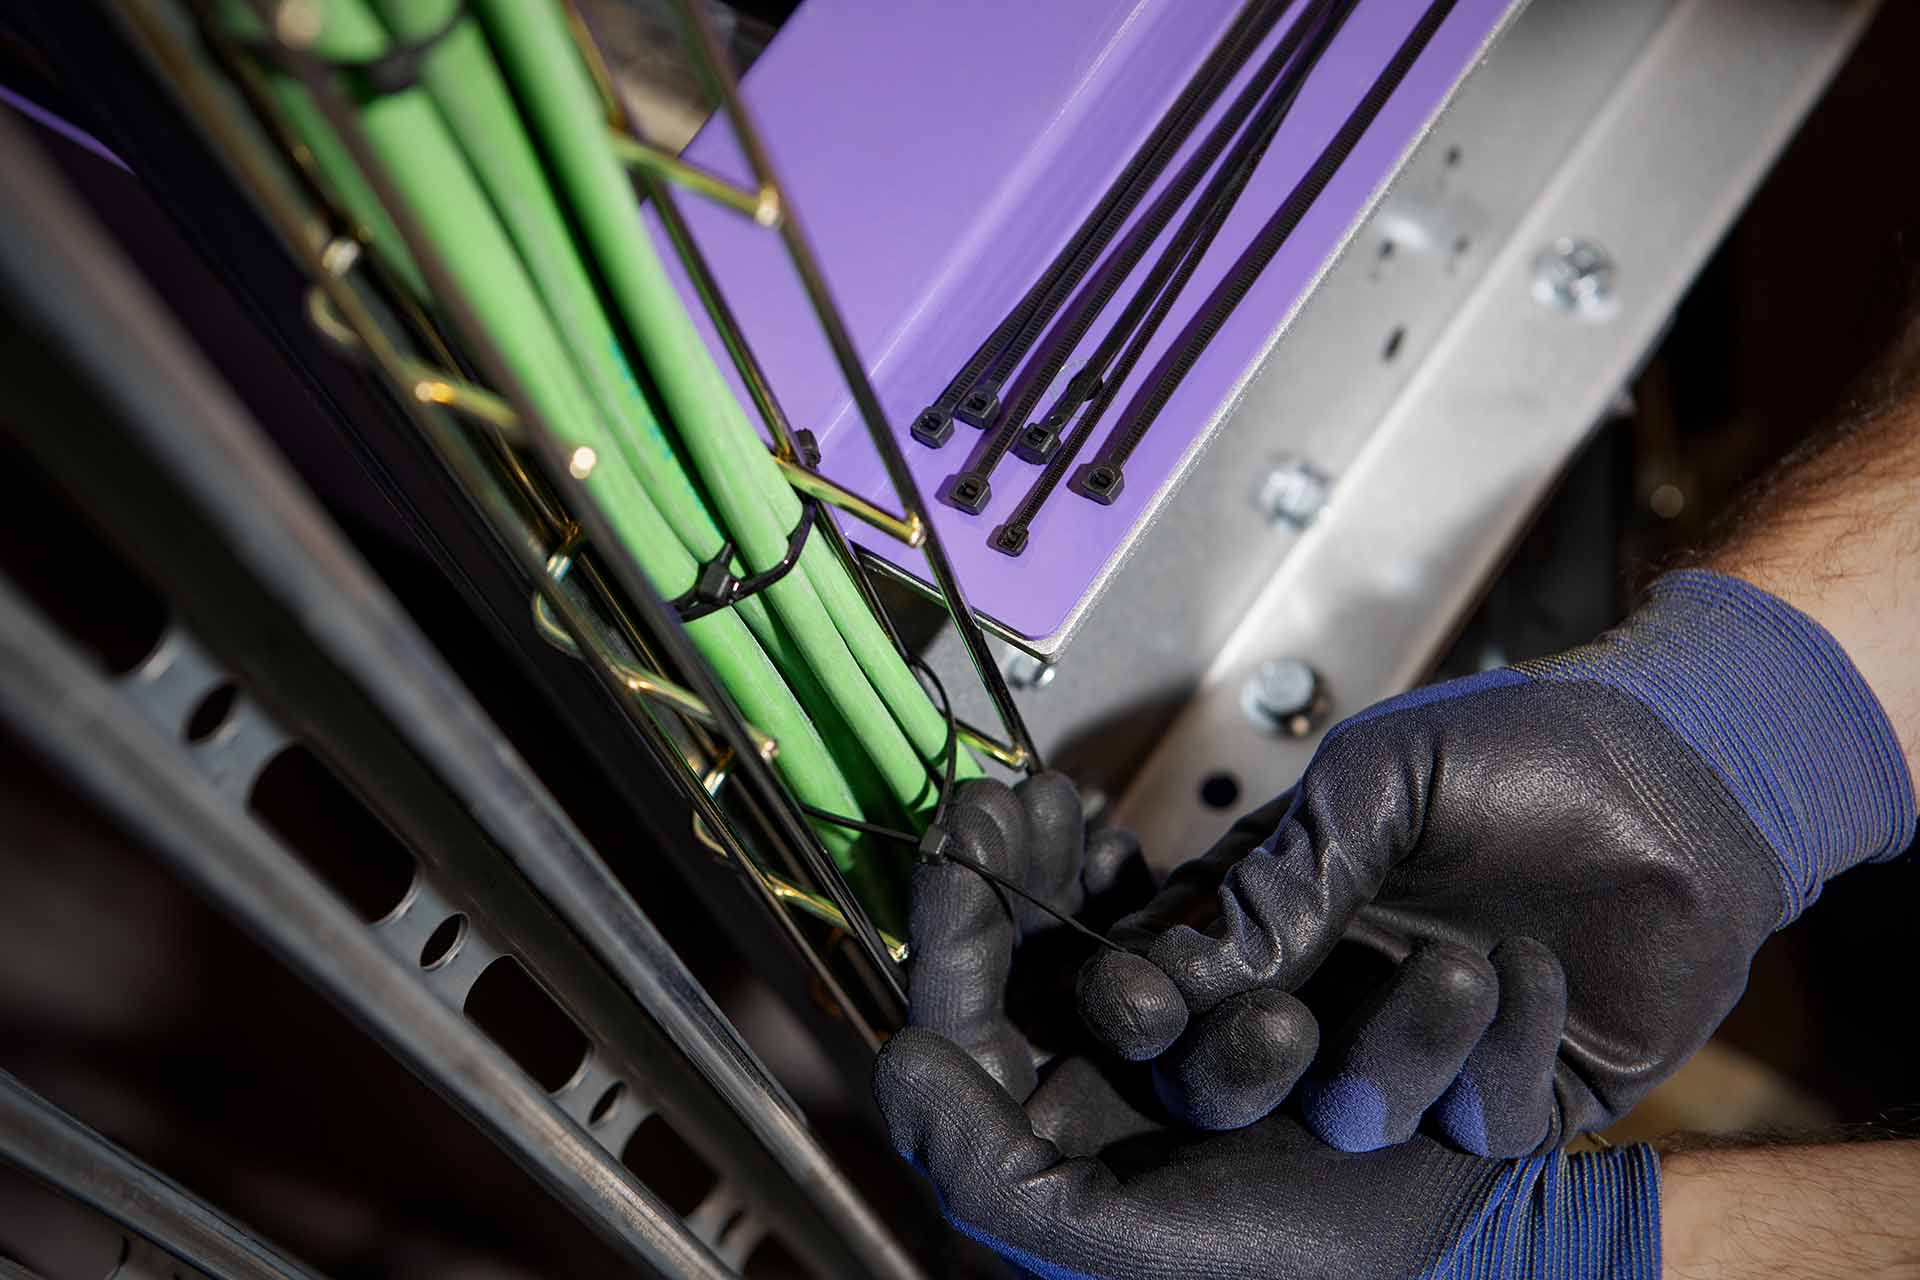 Glove-protected installer's hands holding Nylon® cable ties in an electrical installation